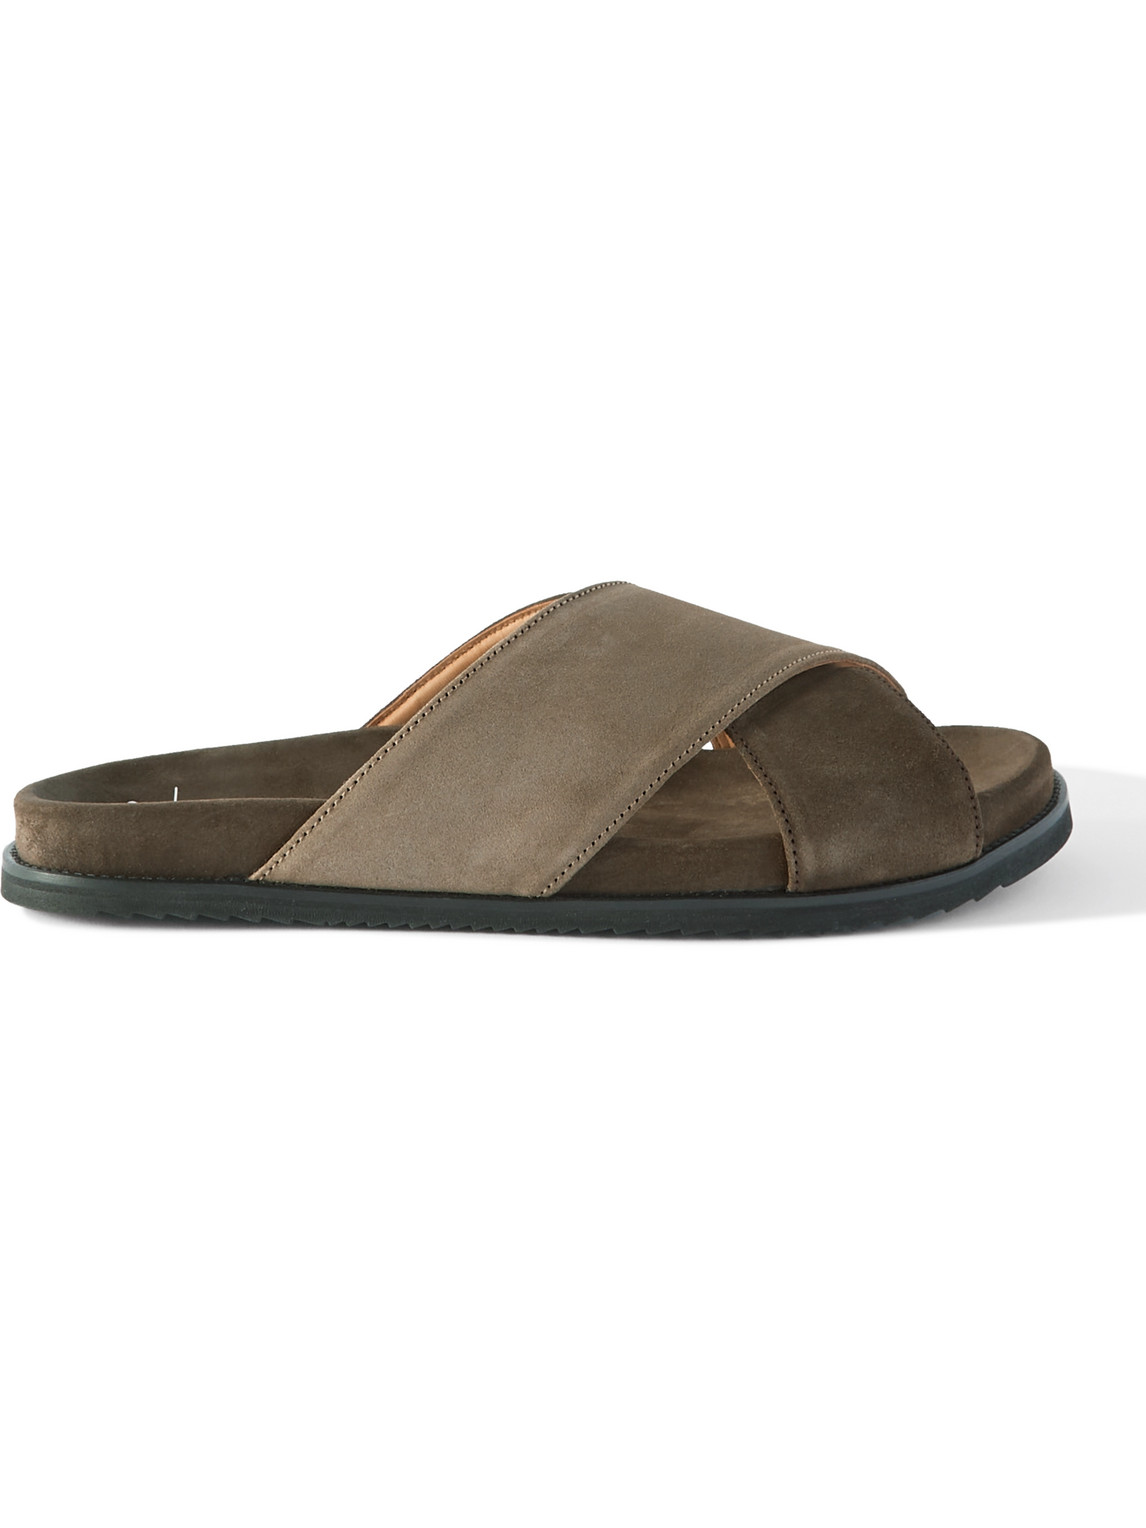 Mr P. David Regenerated Suede By Evolo® Sandals In Green